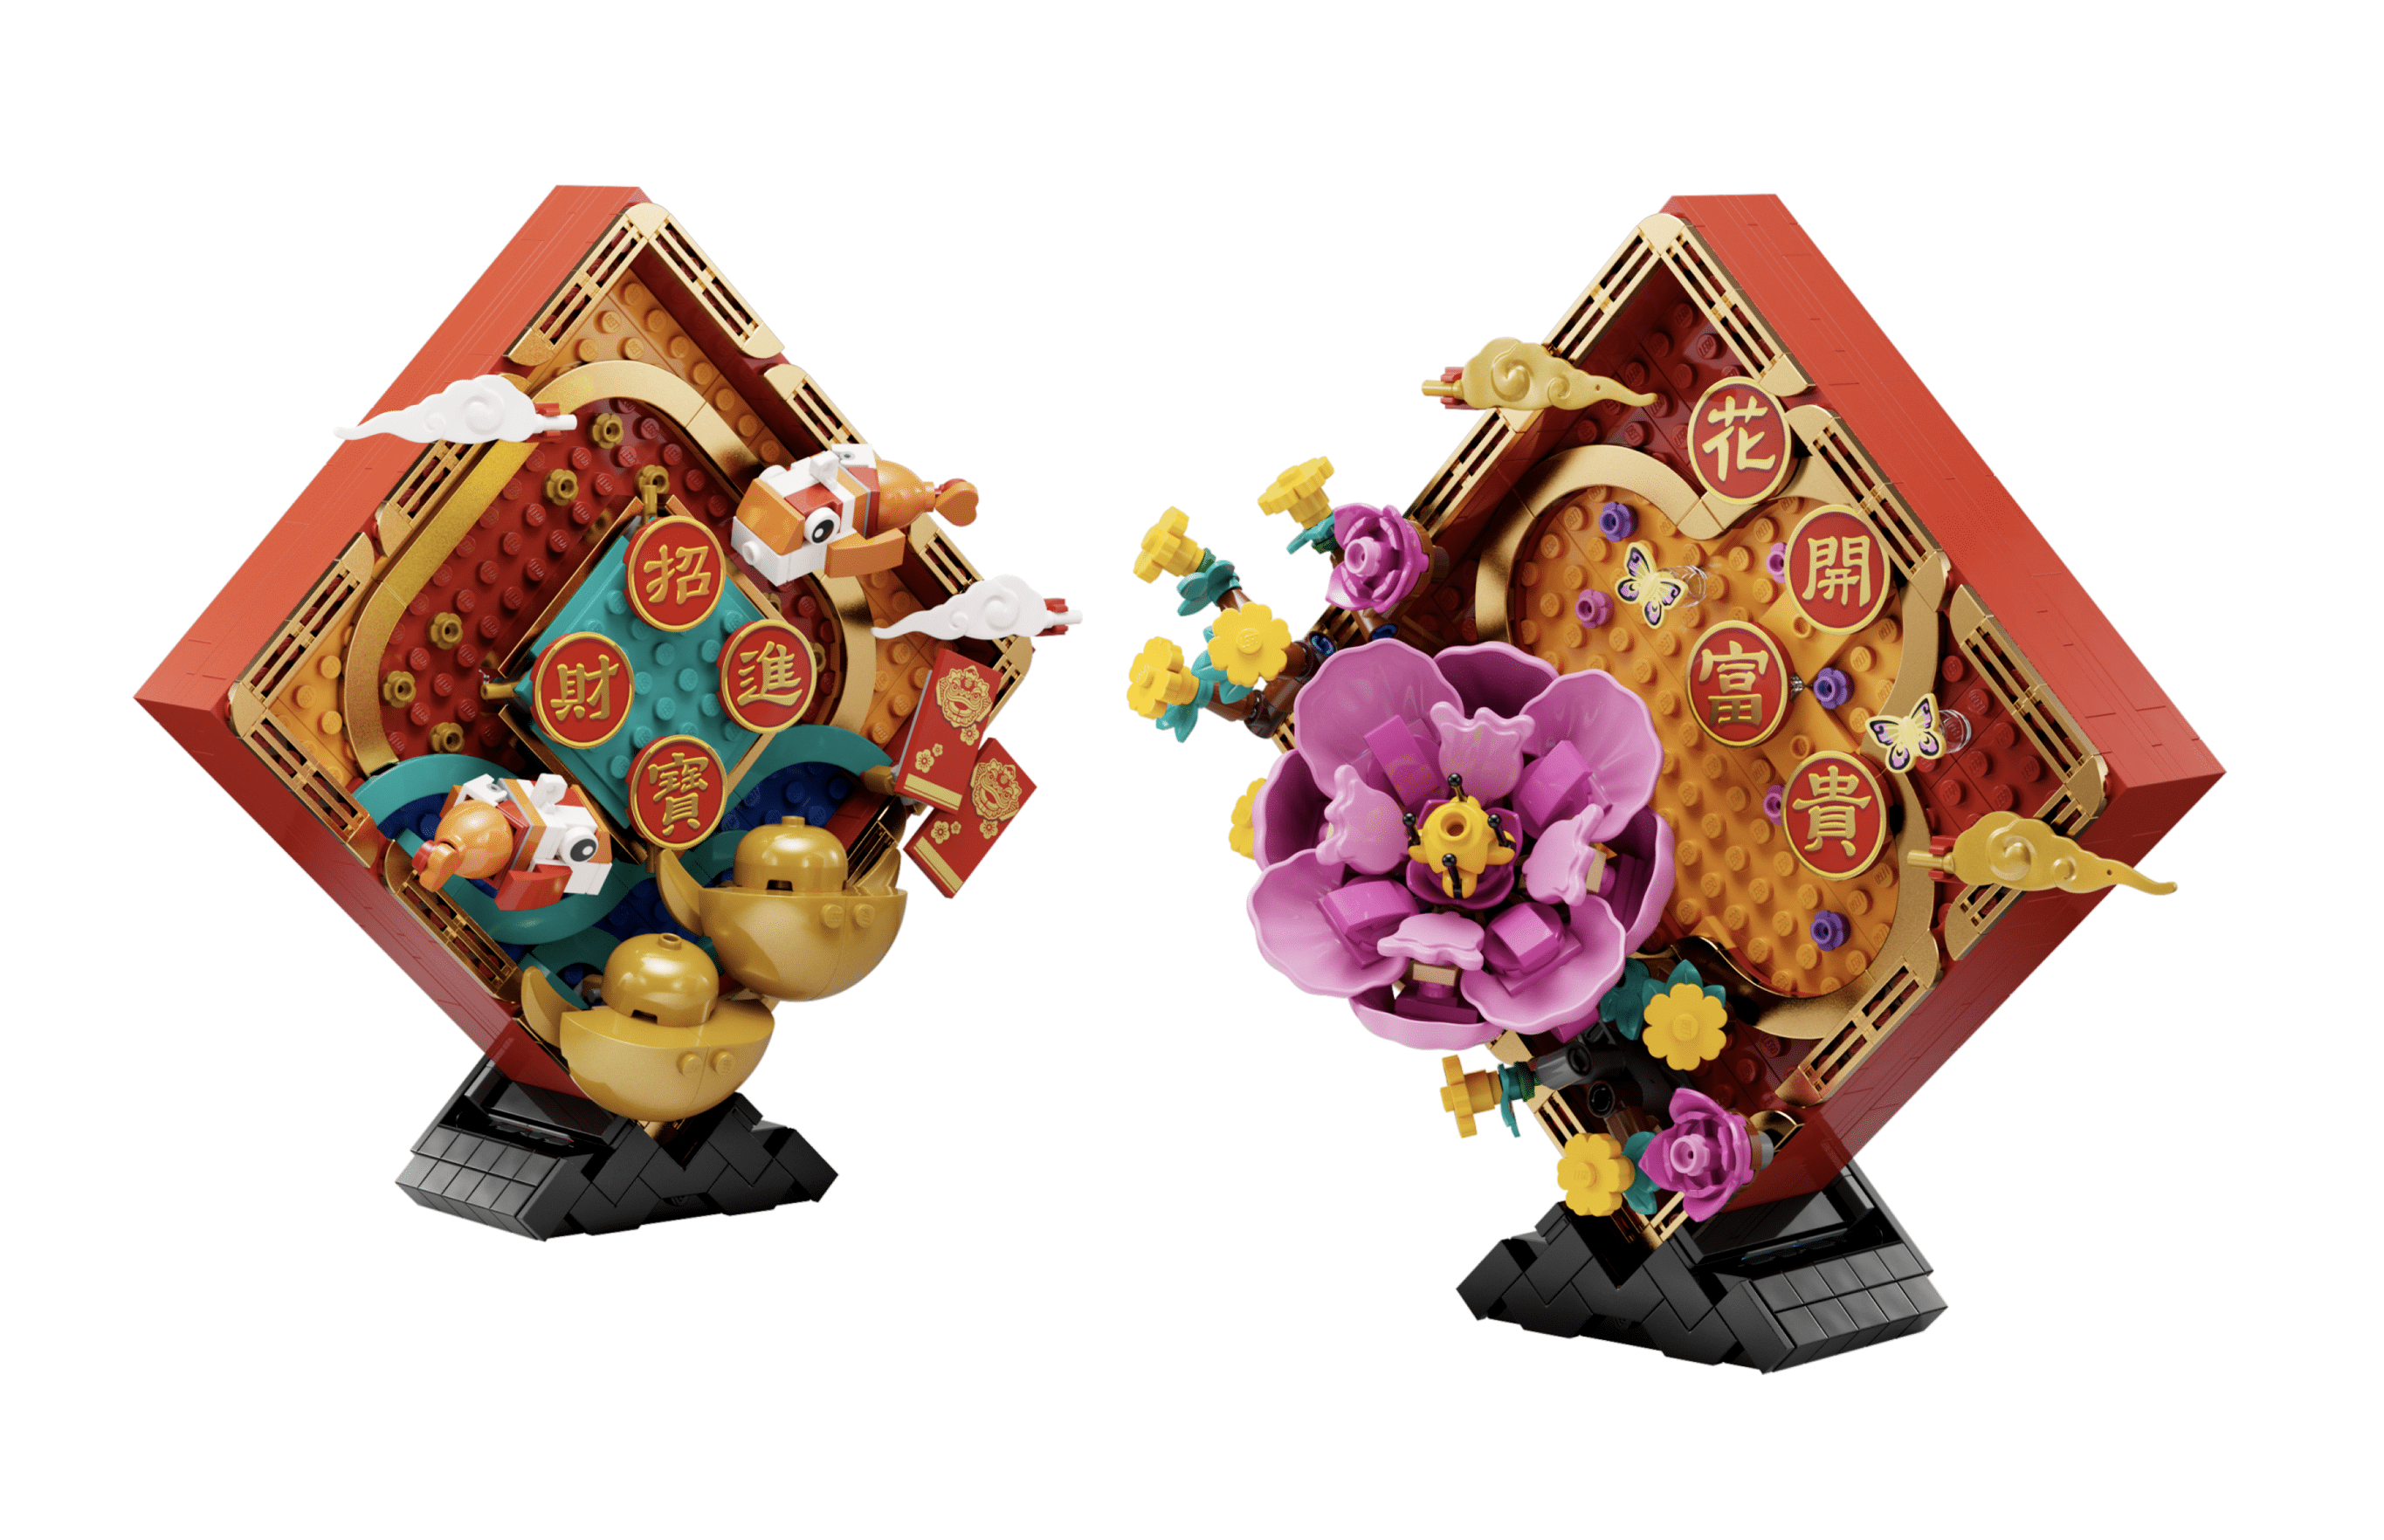 LEGO Lunar New Year sets already available online